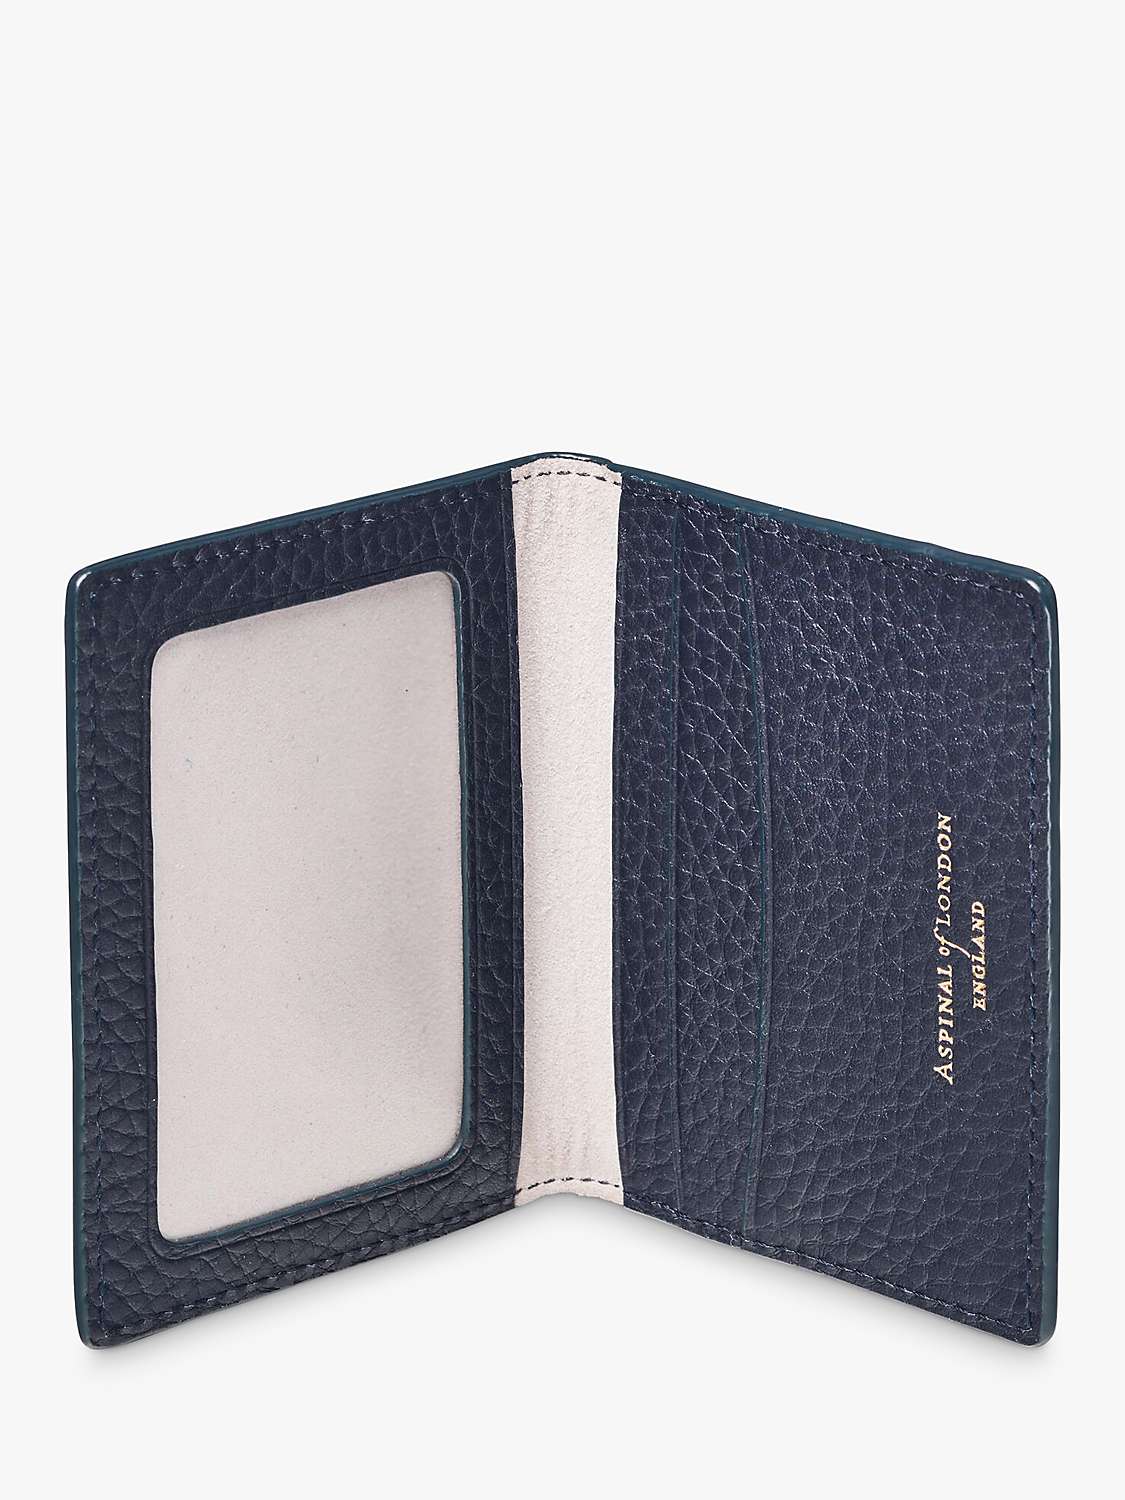 Buy Aspinal of London ID and Travel Card Holder Online at johnlewis.com